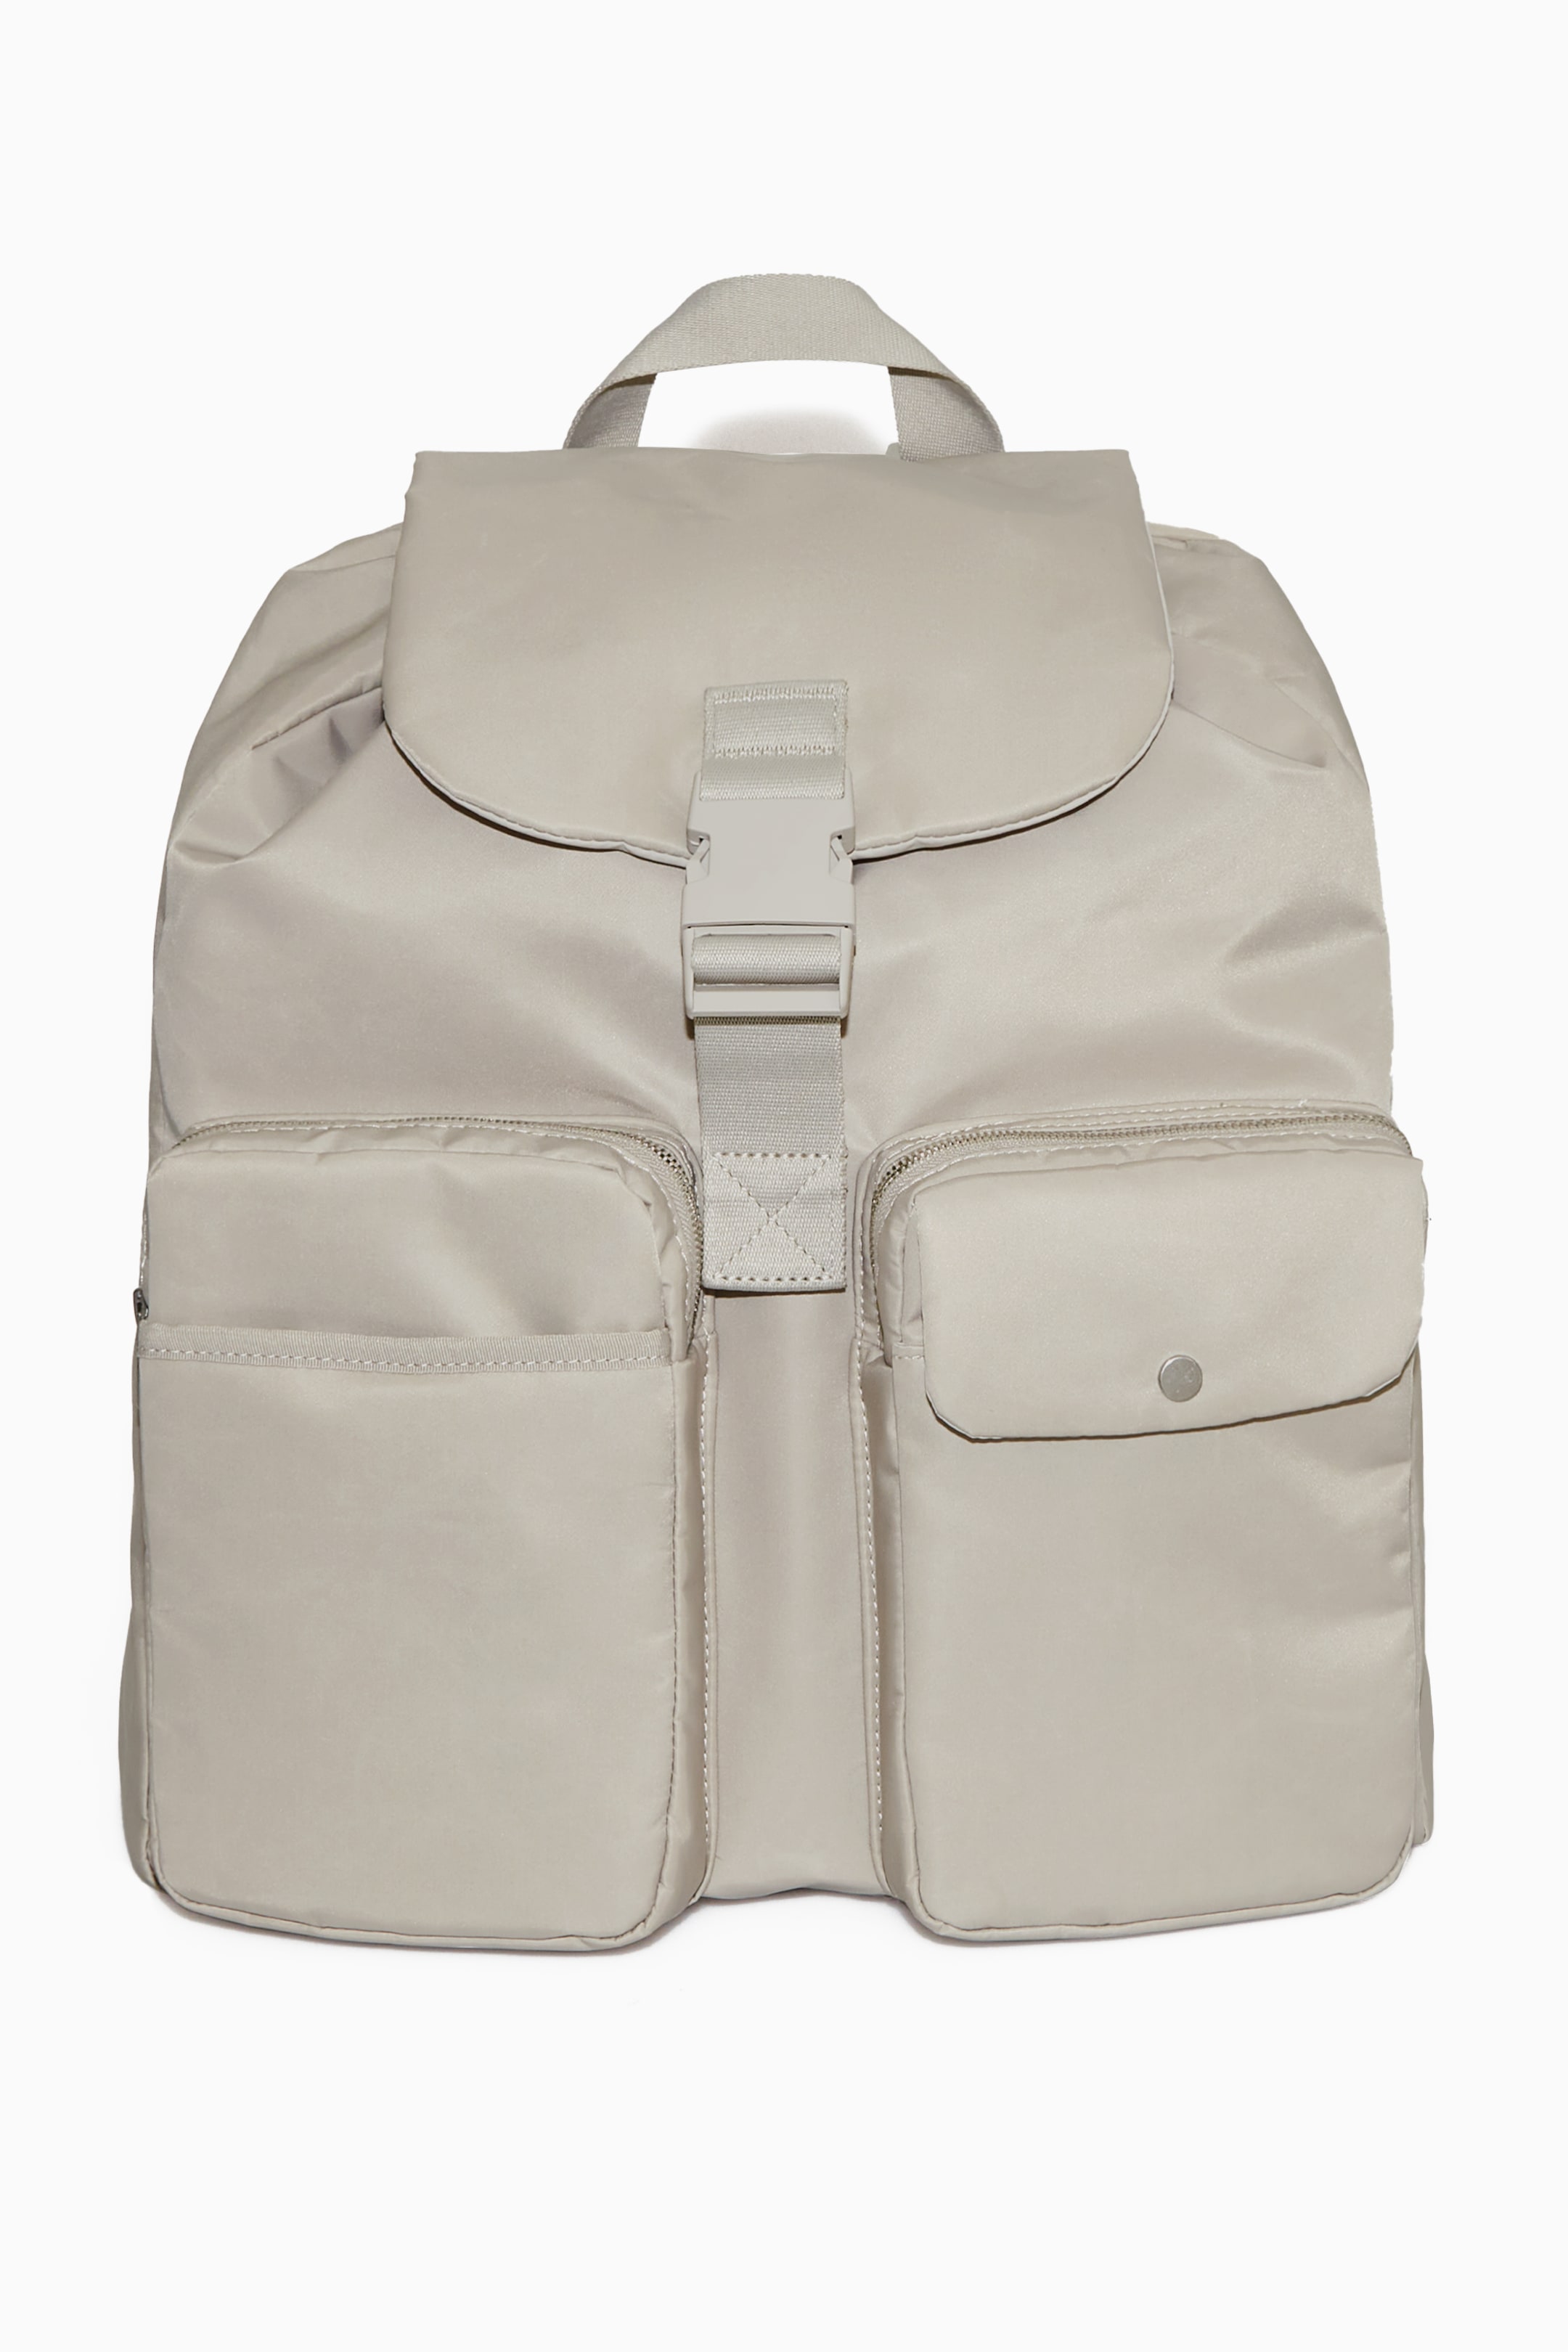 Front image of cos WATERPROOF NYLON DRAWSTRING BACKPACK in LIGHT GREY